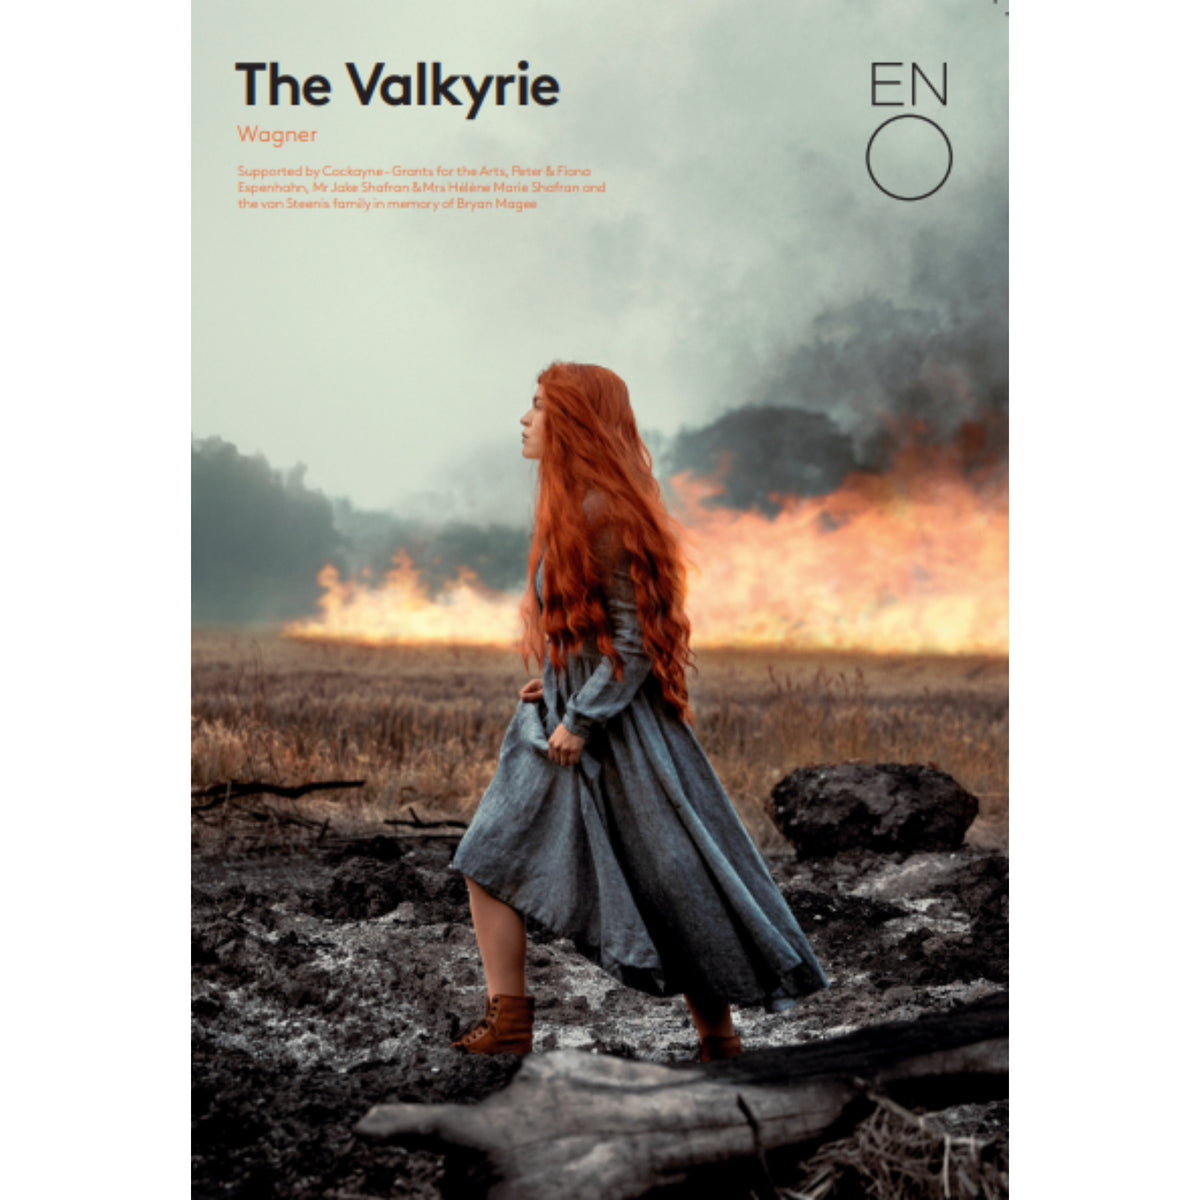 The Valkyrie Programme